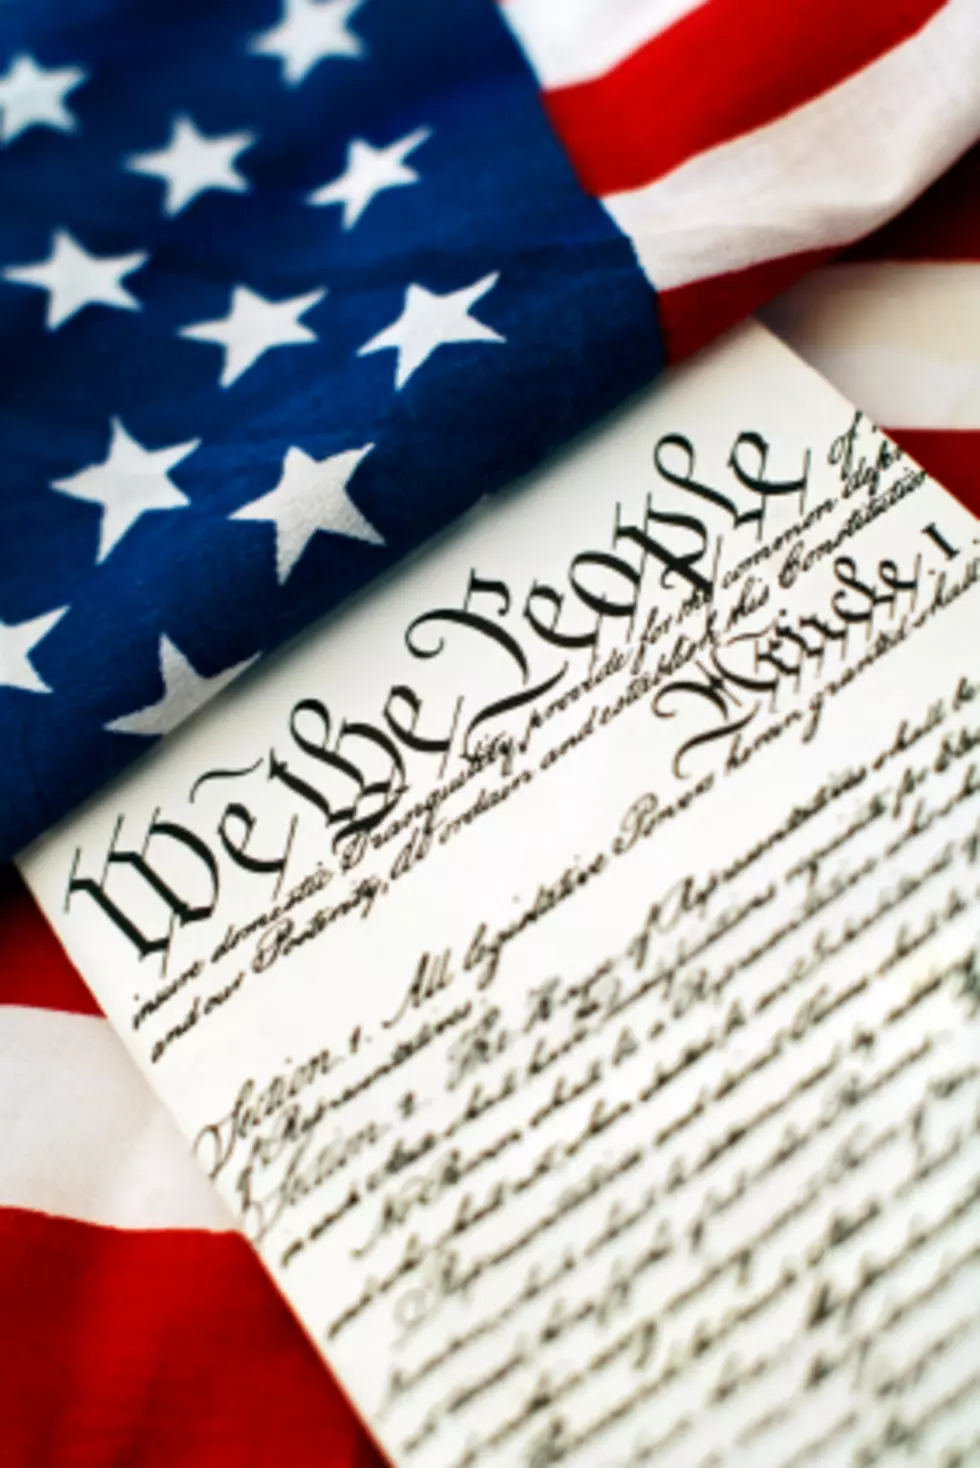 Poll &#8211; New Jerseyans need refresher course on U.S. Constitution